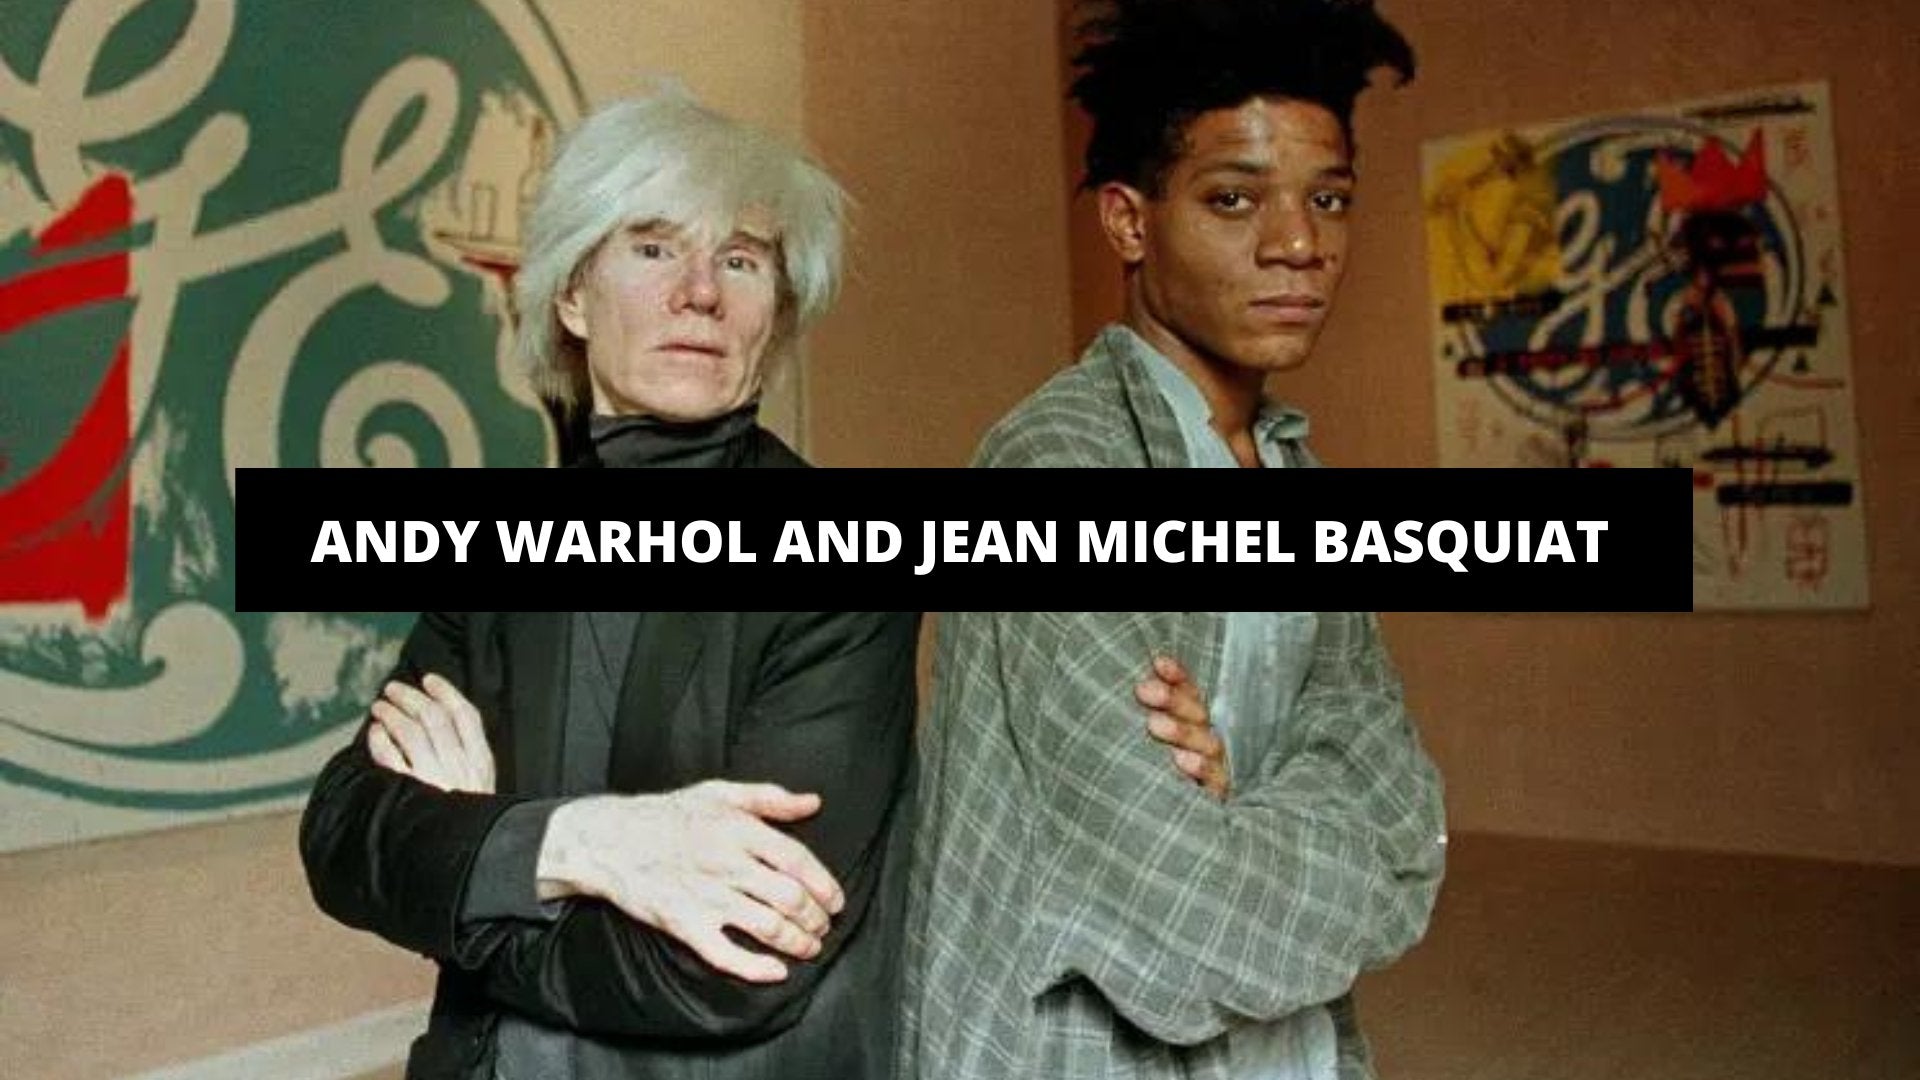 Andy Warhol and Jean Michel Basquiat - The Trendy Art